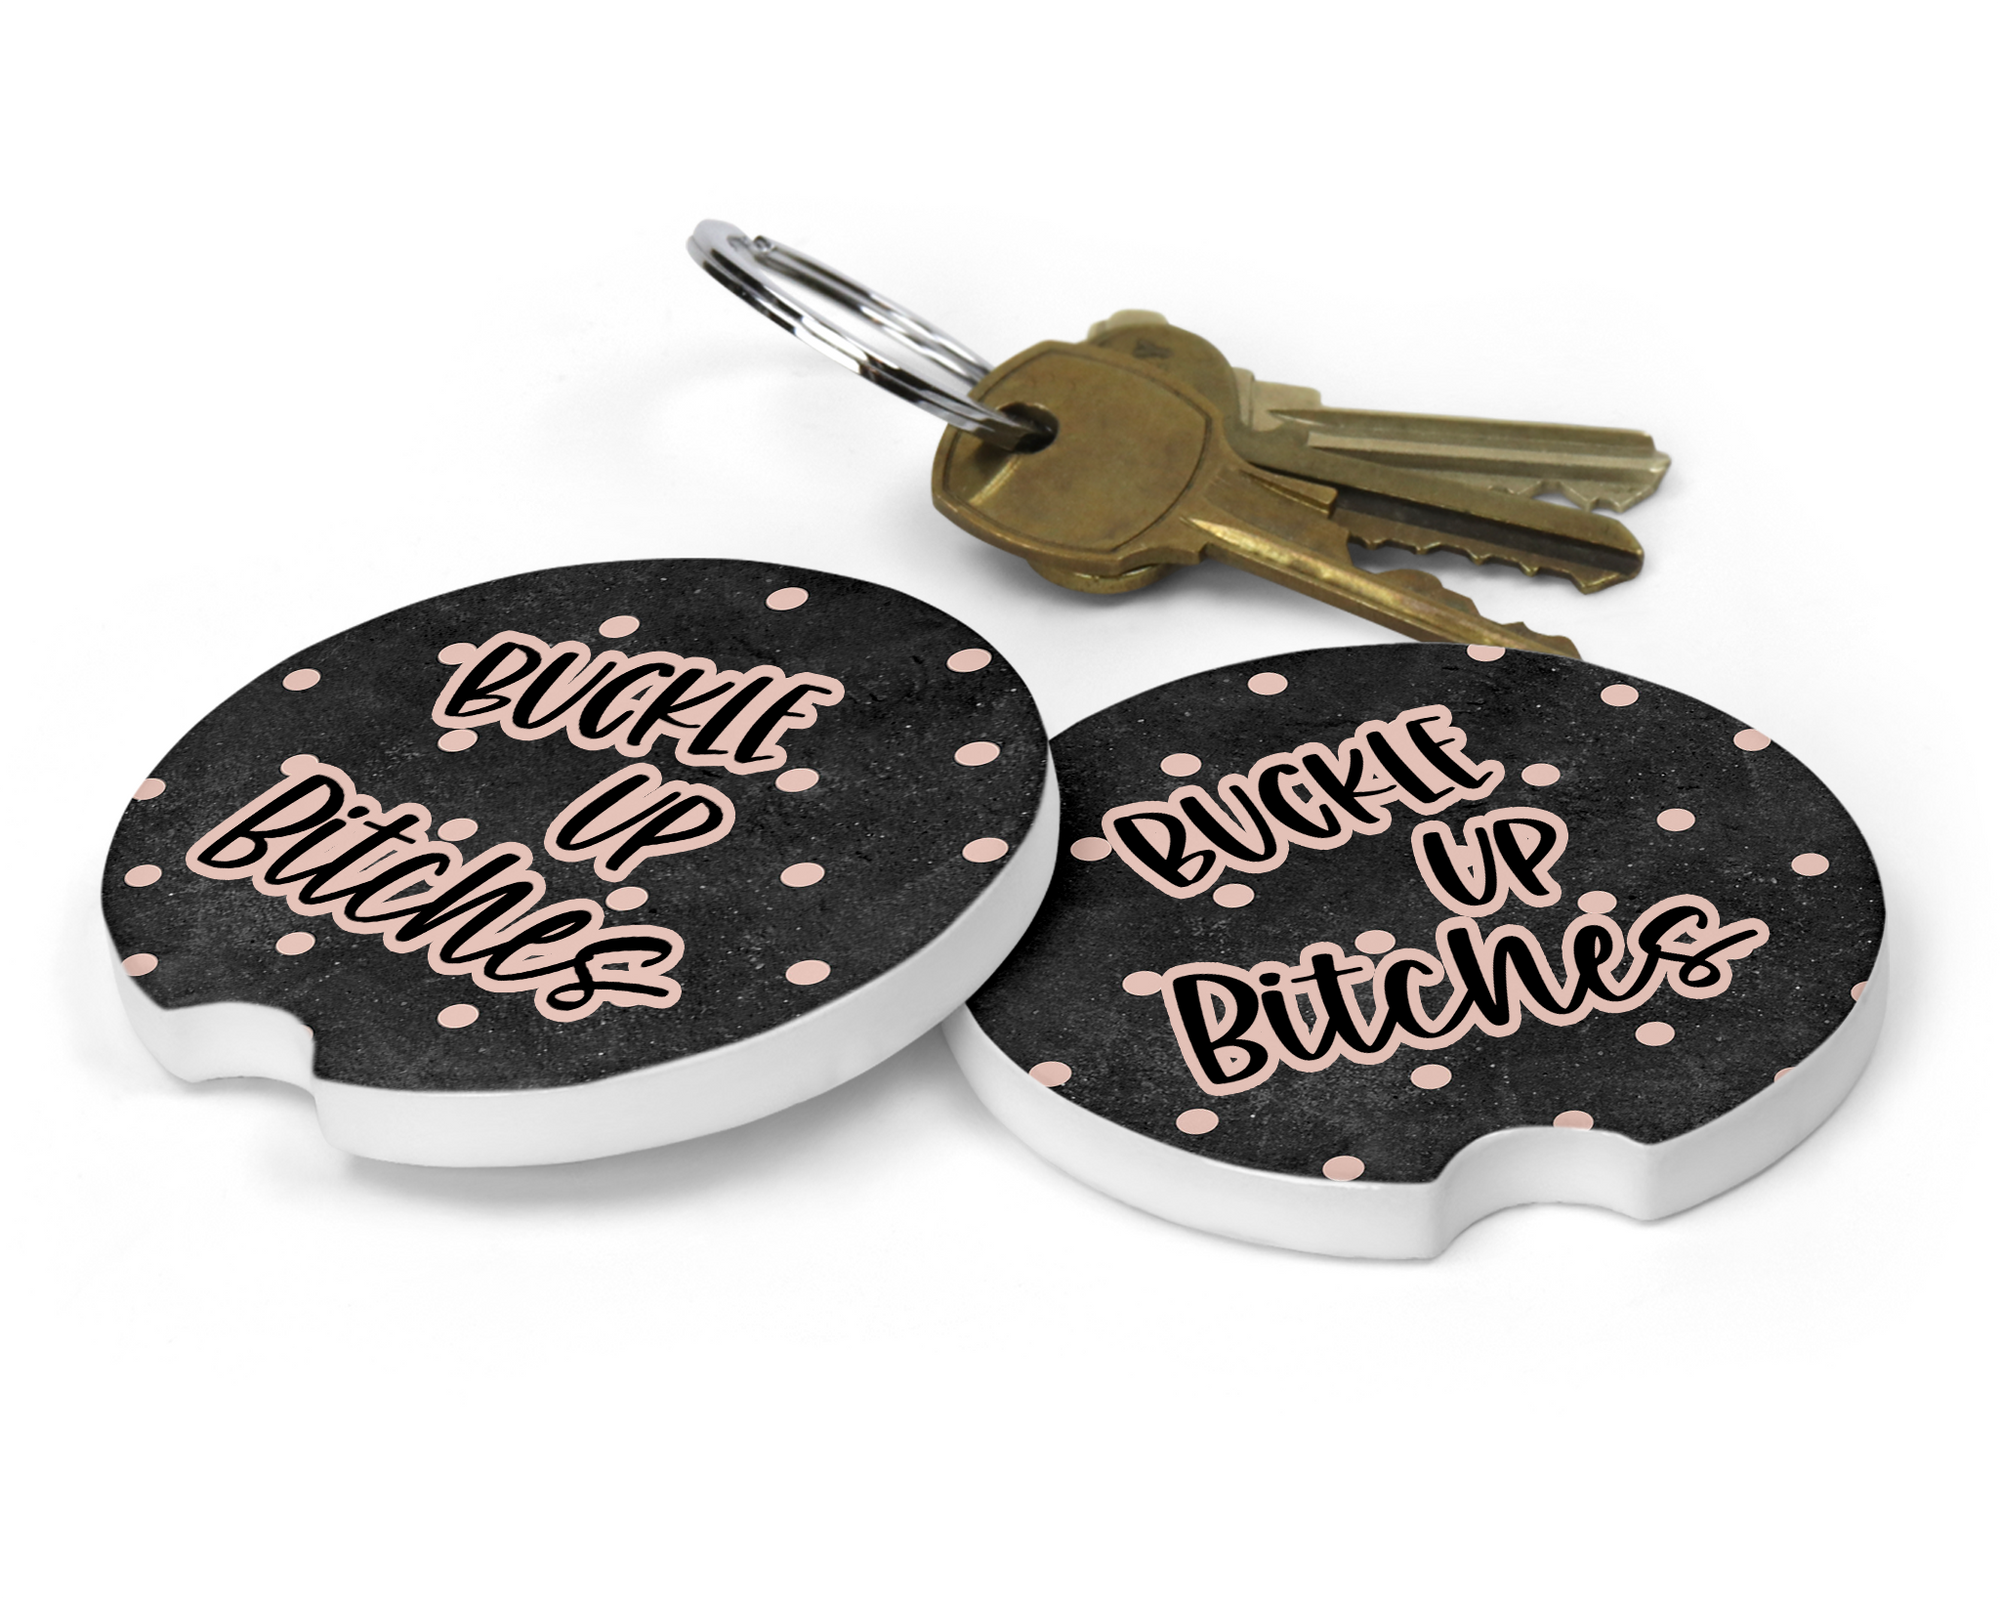 Buckle Up Bitches Ceramic Car Coasters